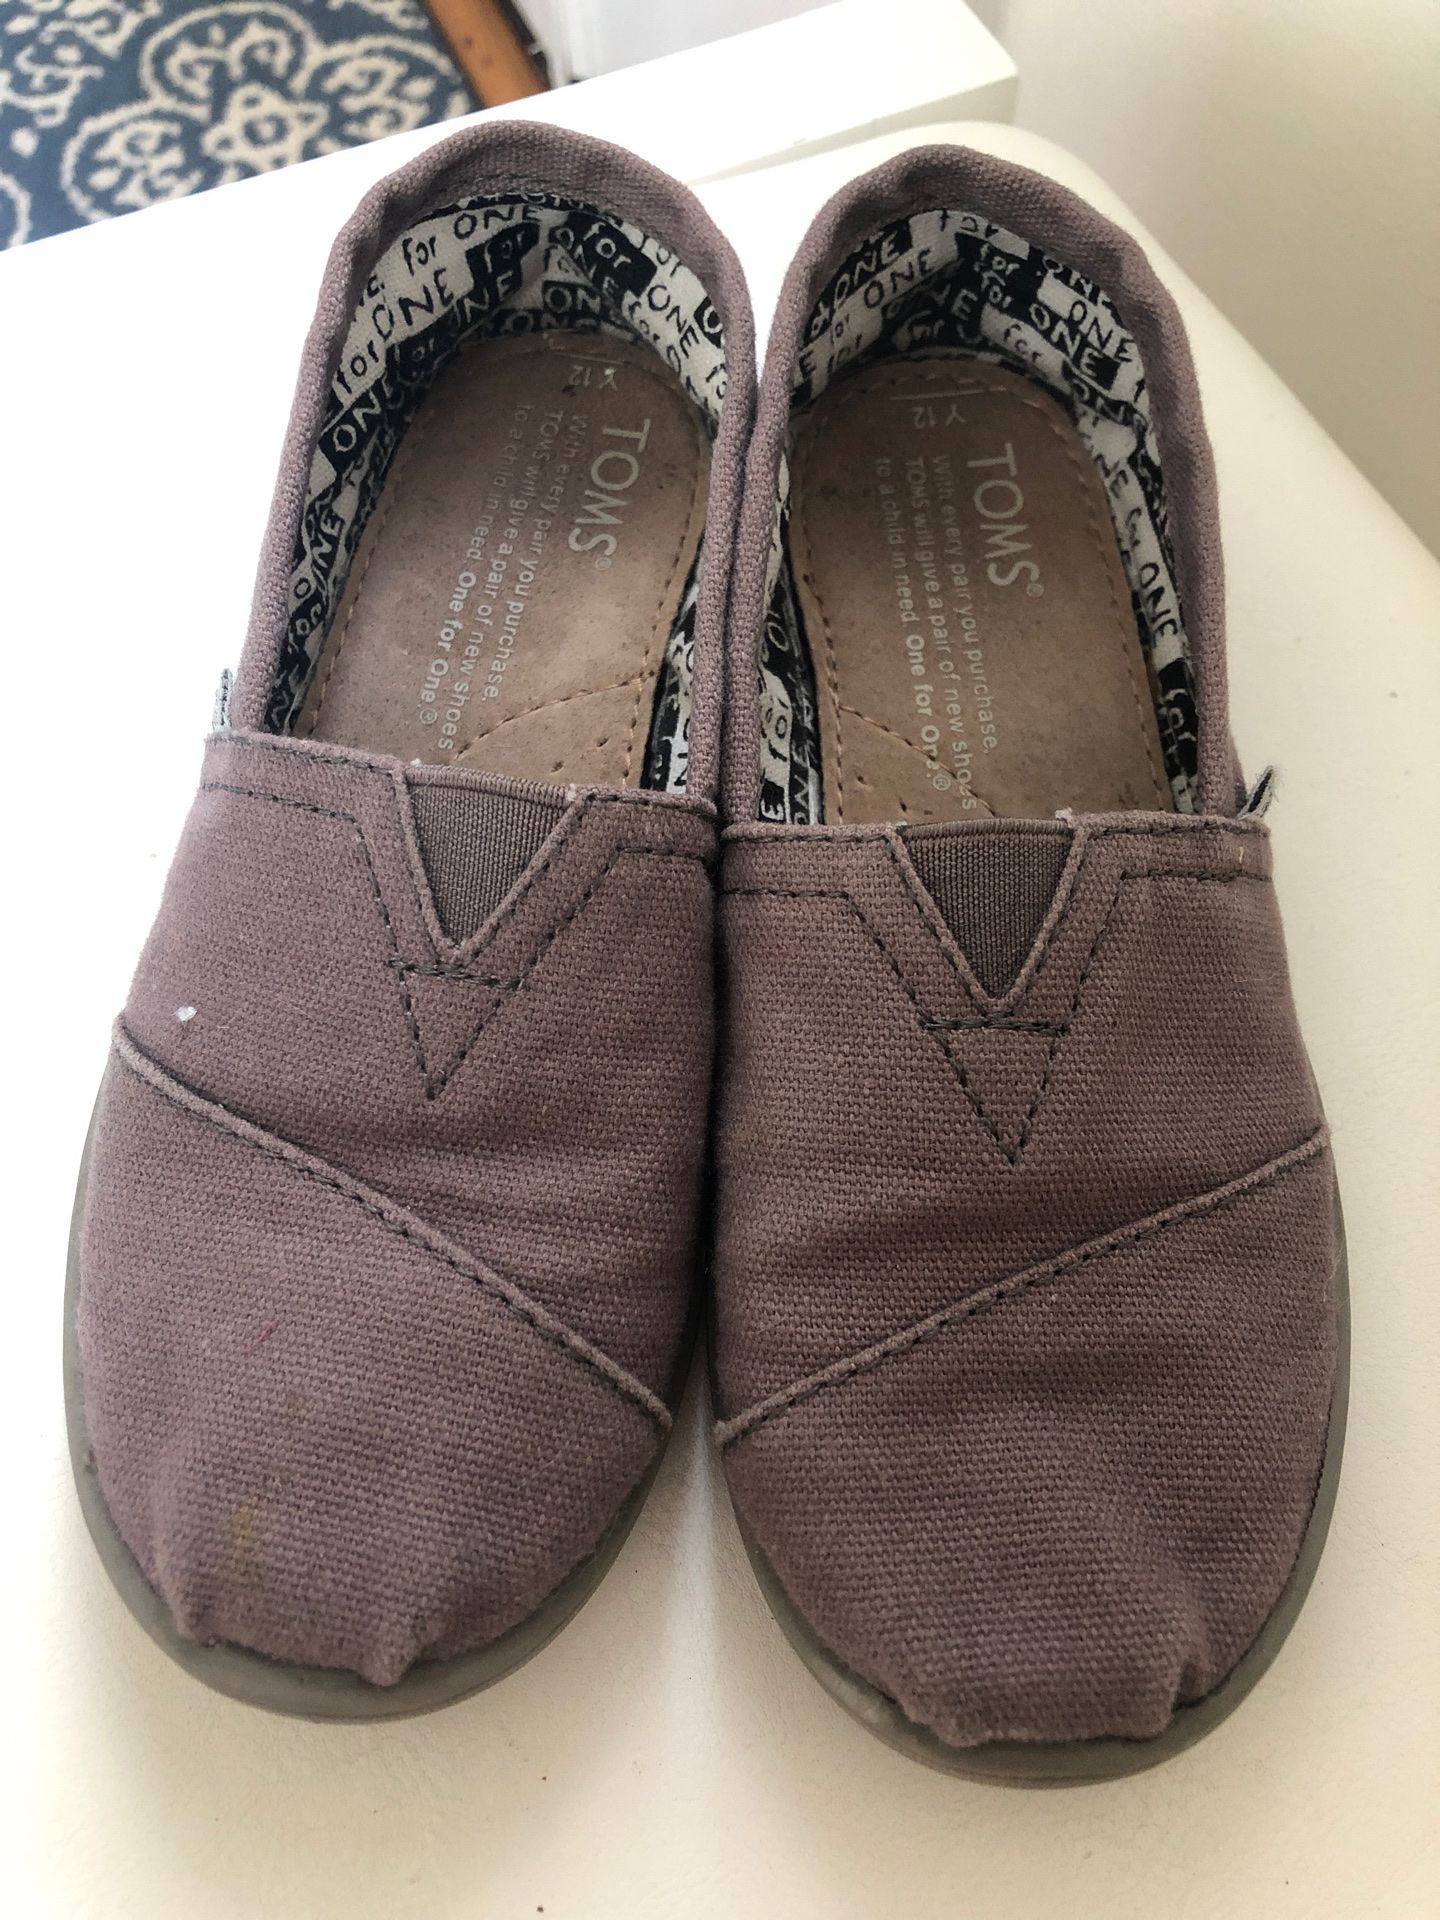 Toms shoes for girls size 12